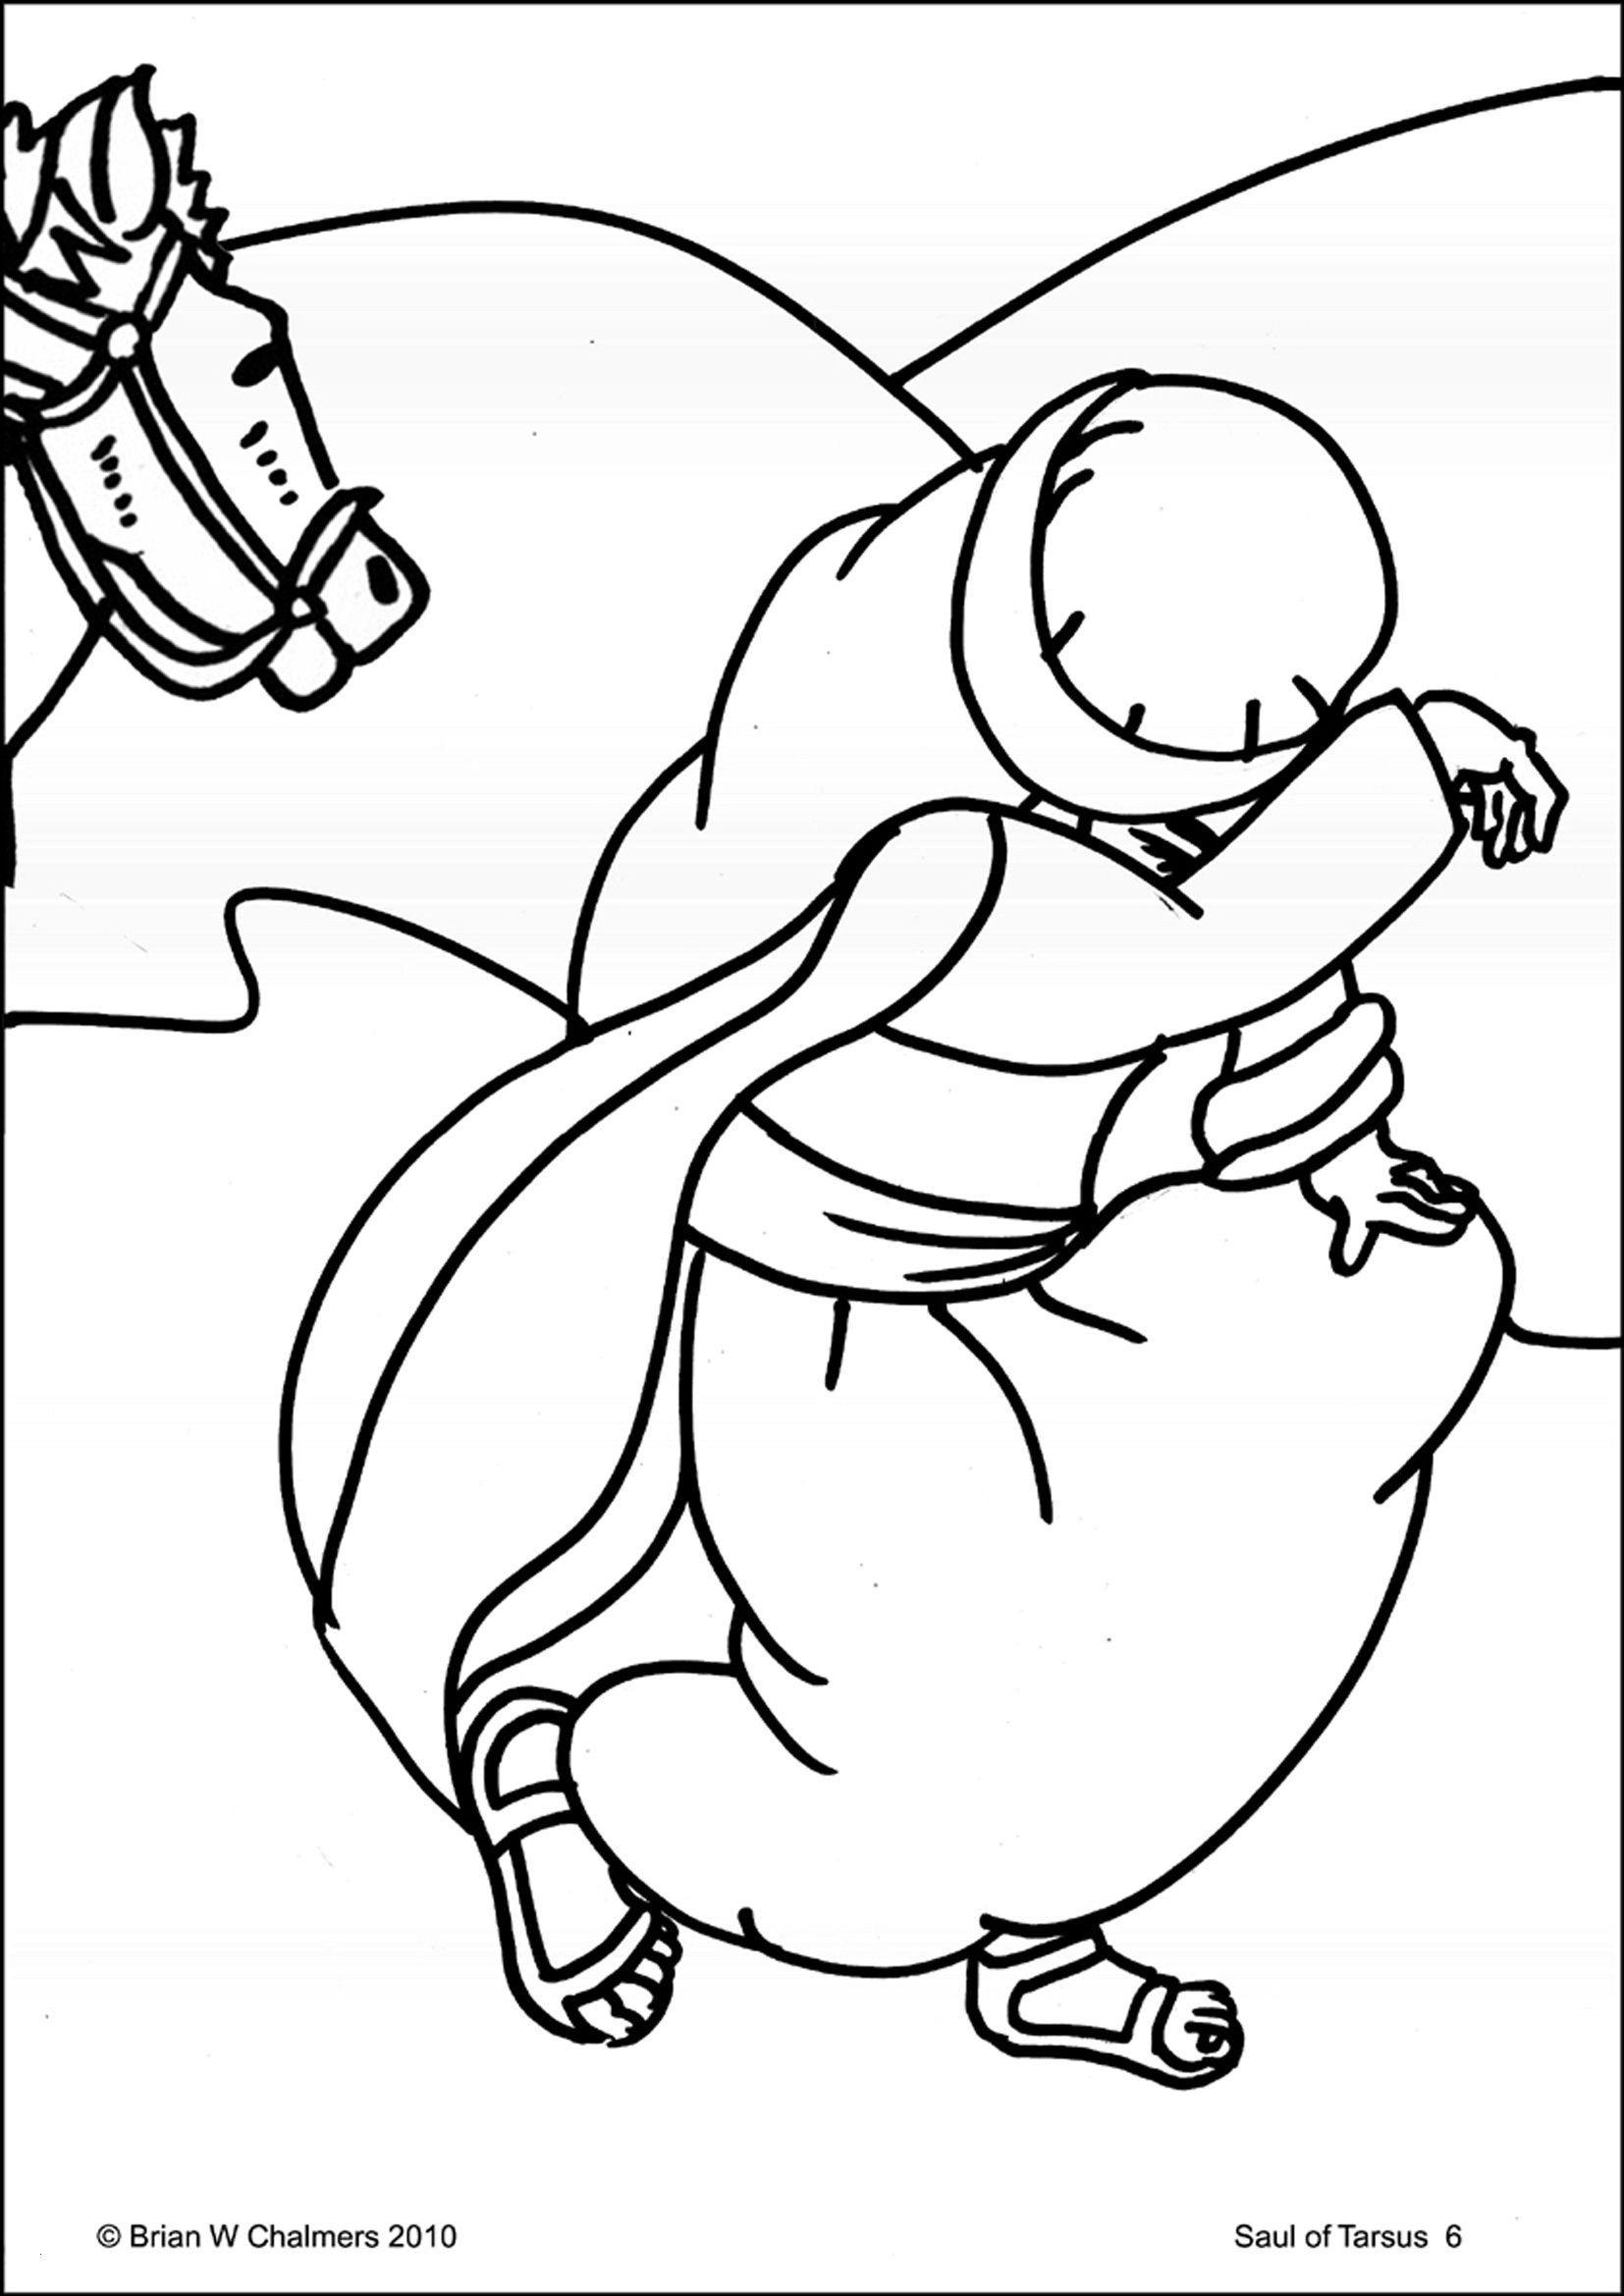 The Good Shepherd Coloring Page Saul Of Tarsus Coloring Sheet Lovely Jesus The Good Shepherd